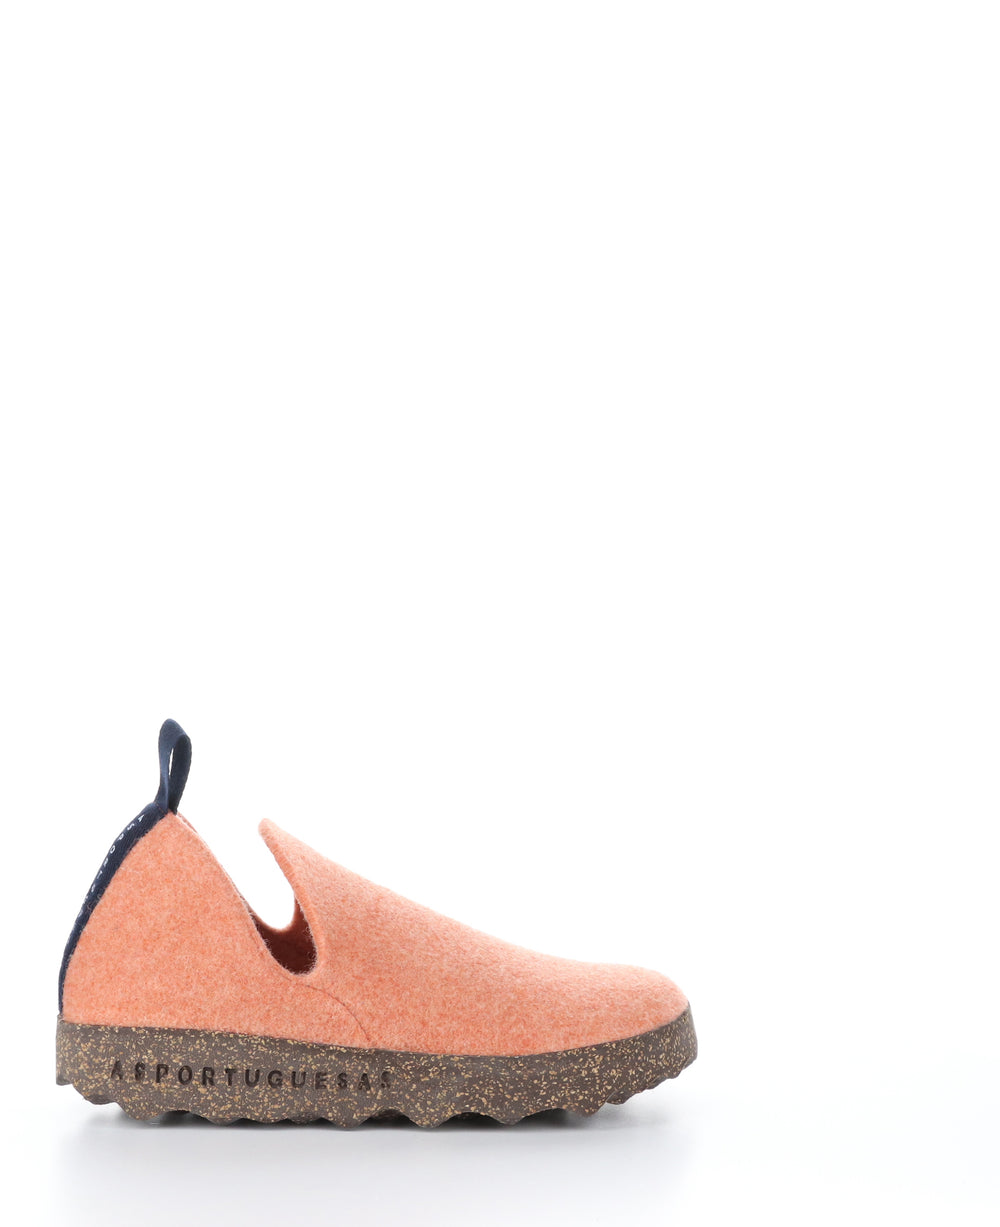 CITY Tangerine Round Toe Shoes|CITY Chaussures à Bout Rond in Orange